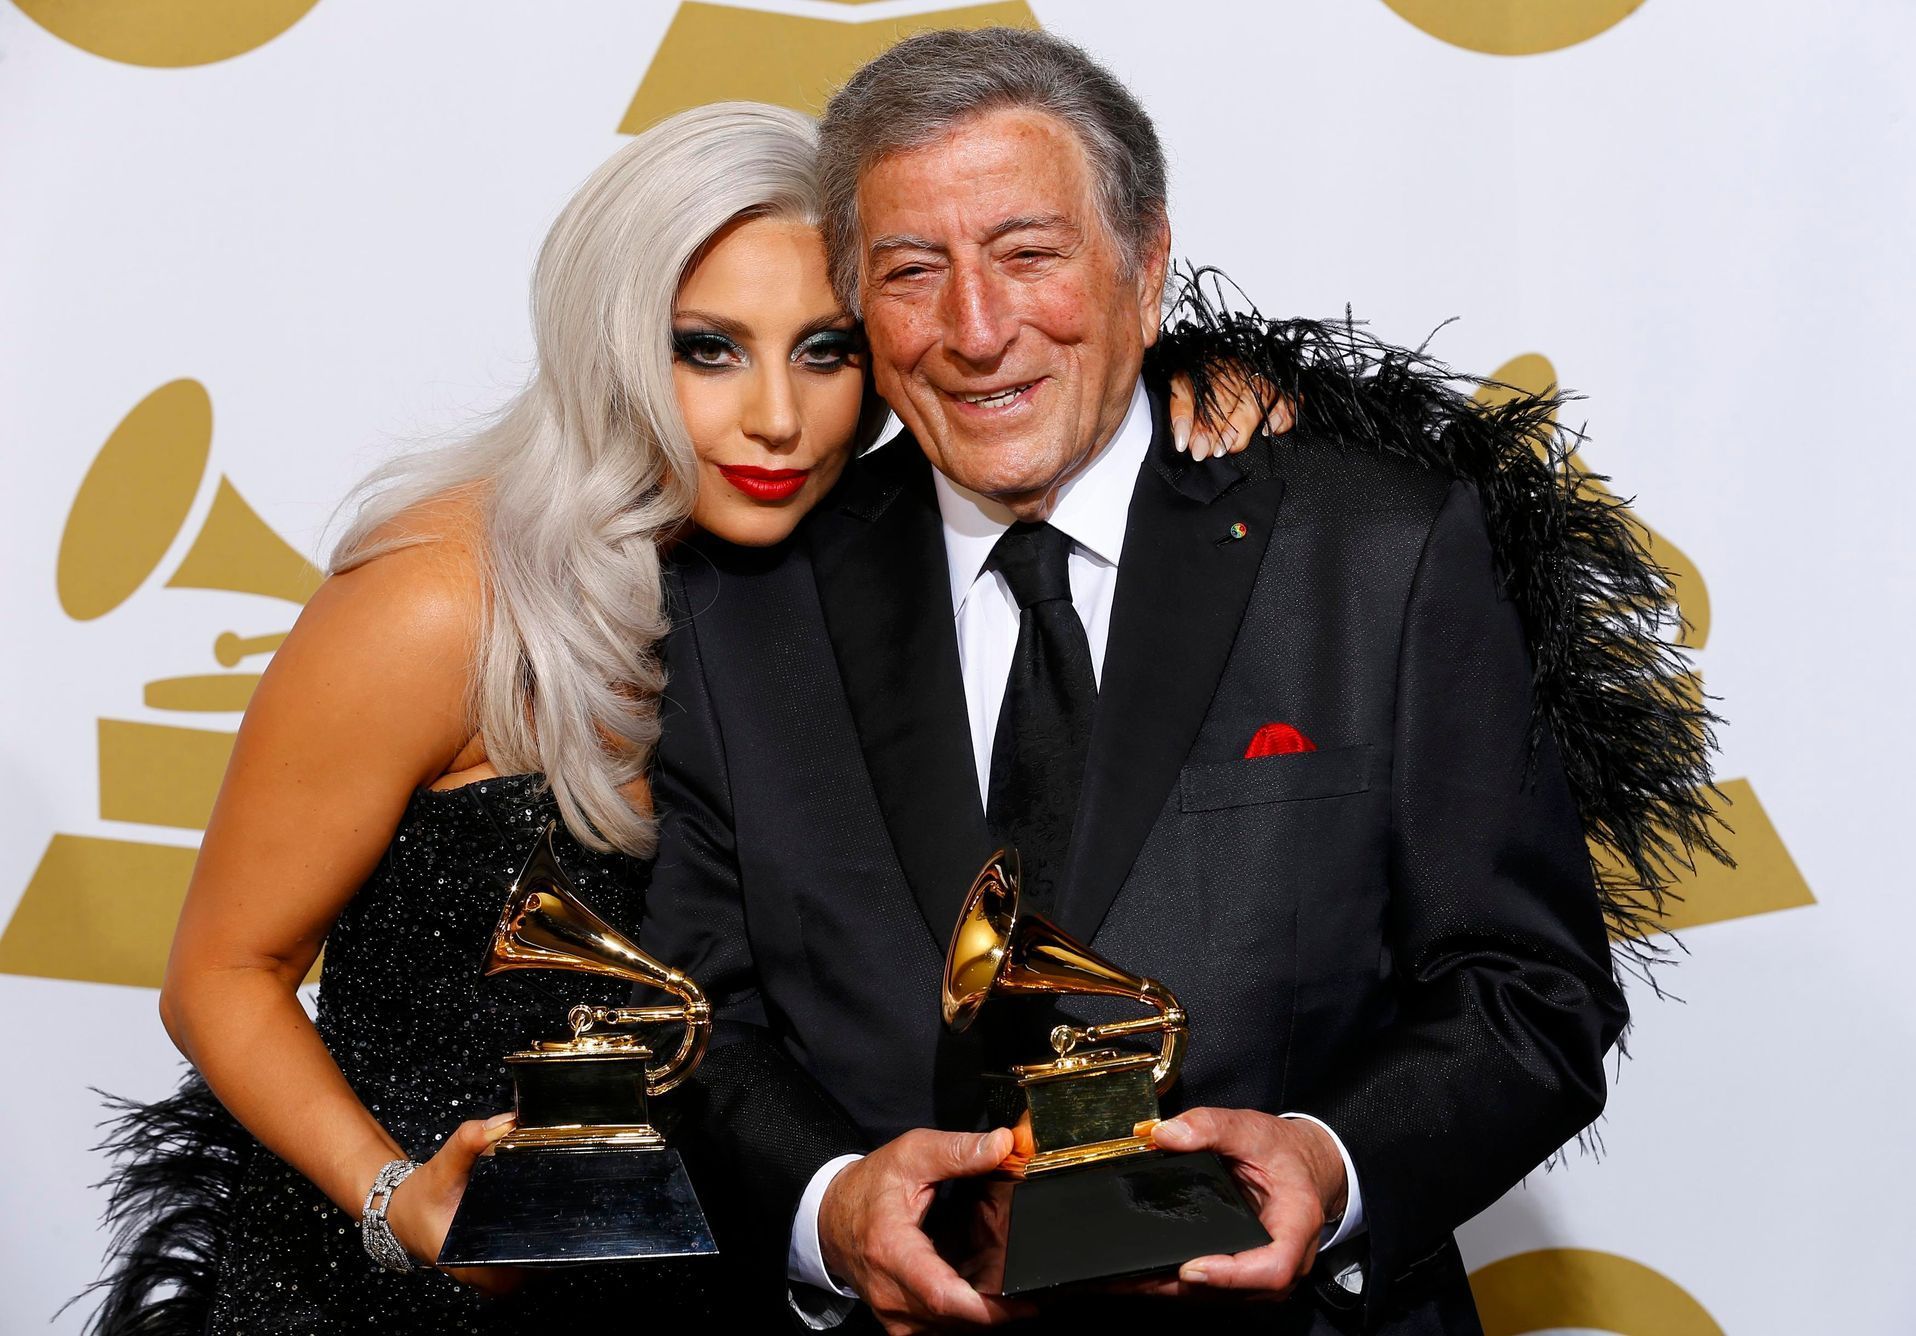 Lady Gaga and Tony Bennett pose with their awards during the 57th annual Grammy Awards in Los Angeles